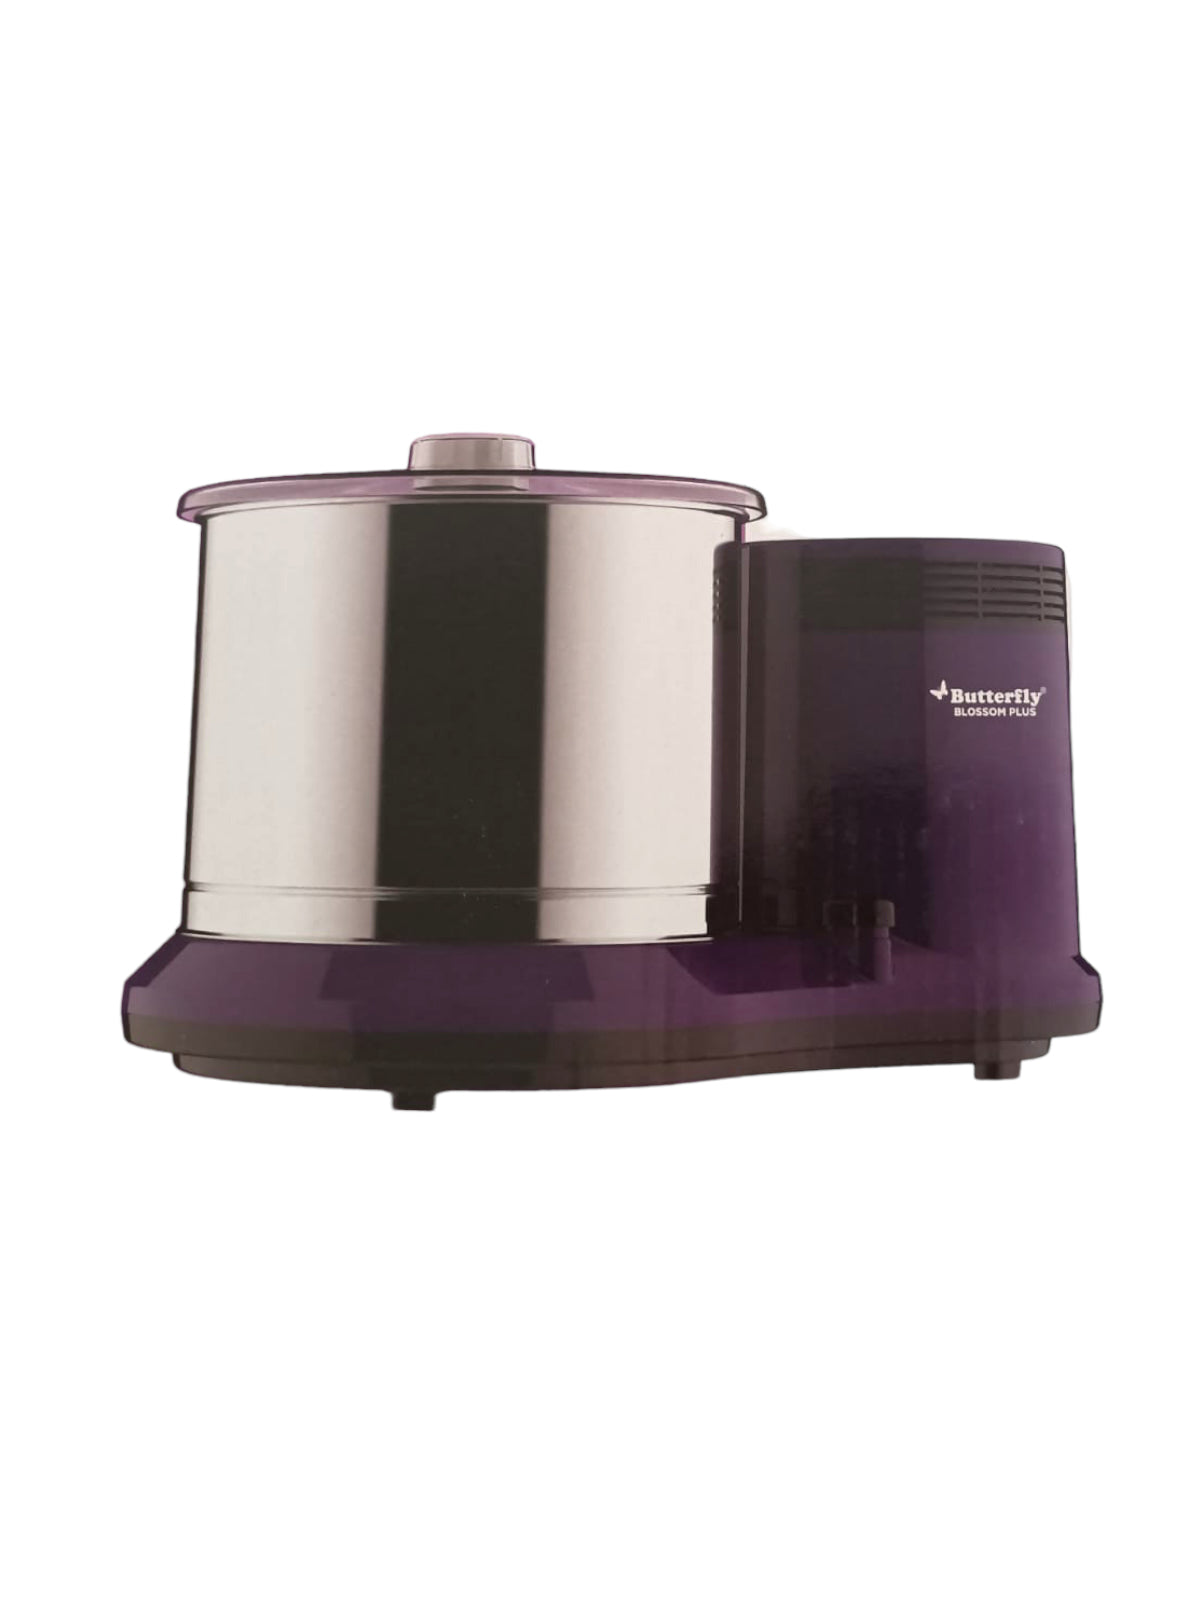 Butterfly Wet grinder Blossom PLus 260 watts